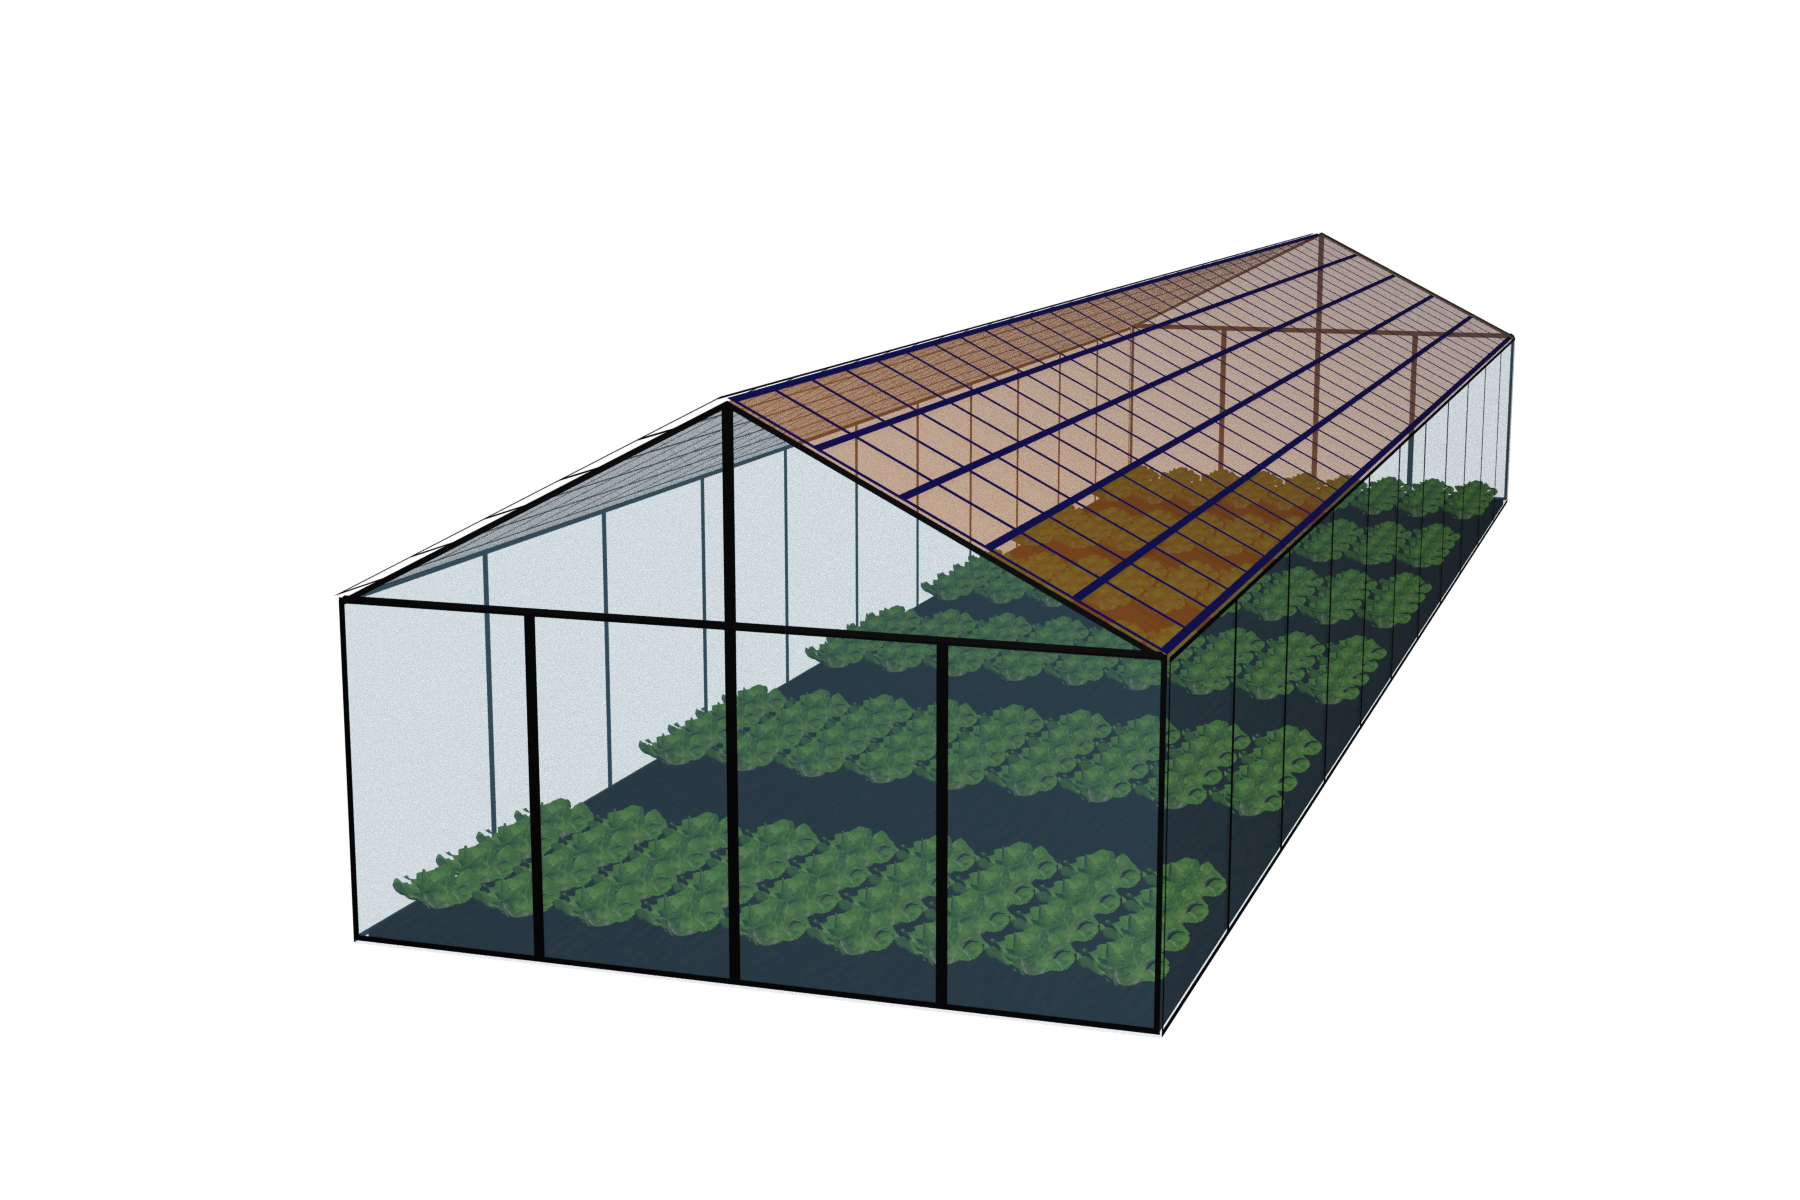 A luminescent solar concentrator greenhouse schematic